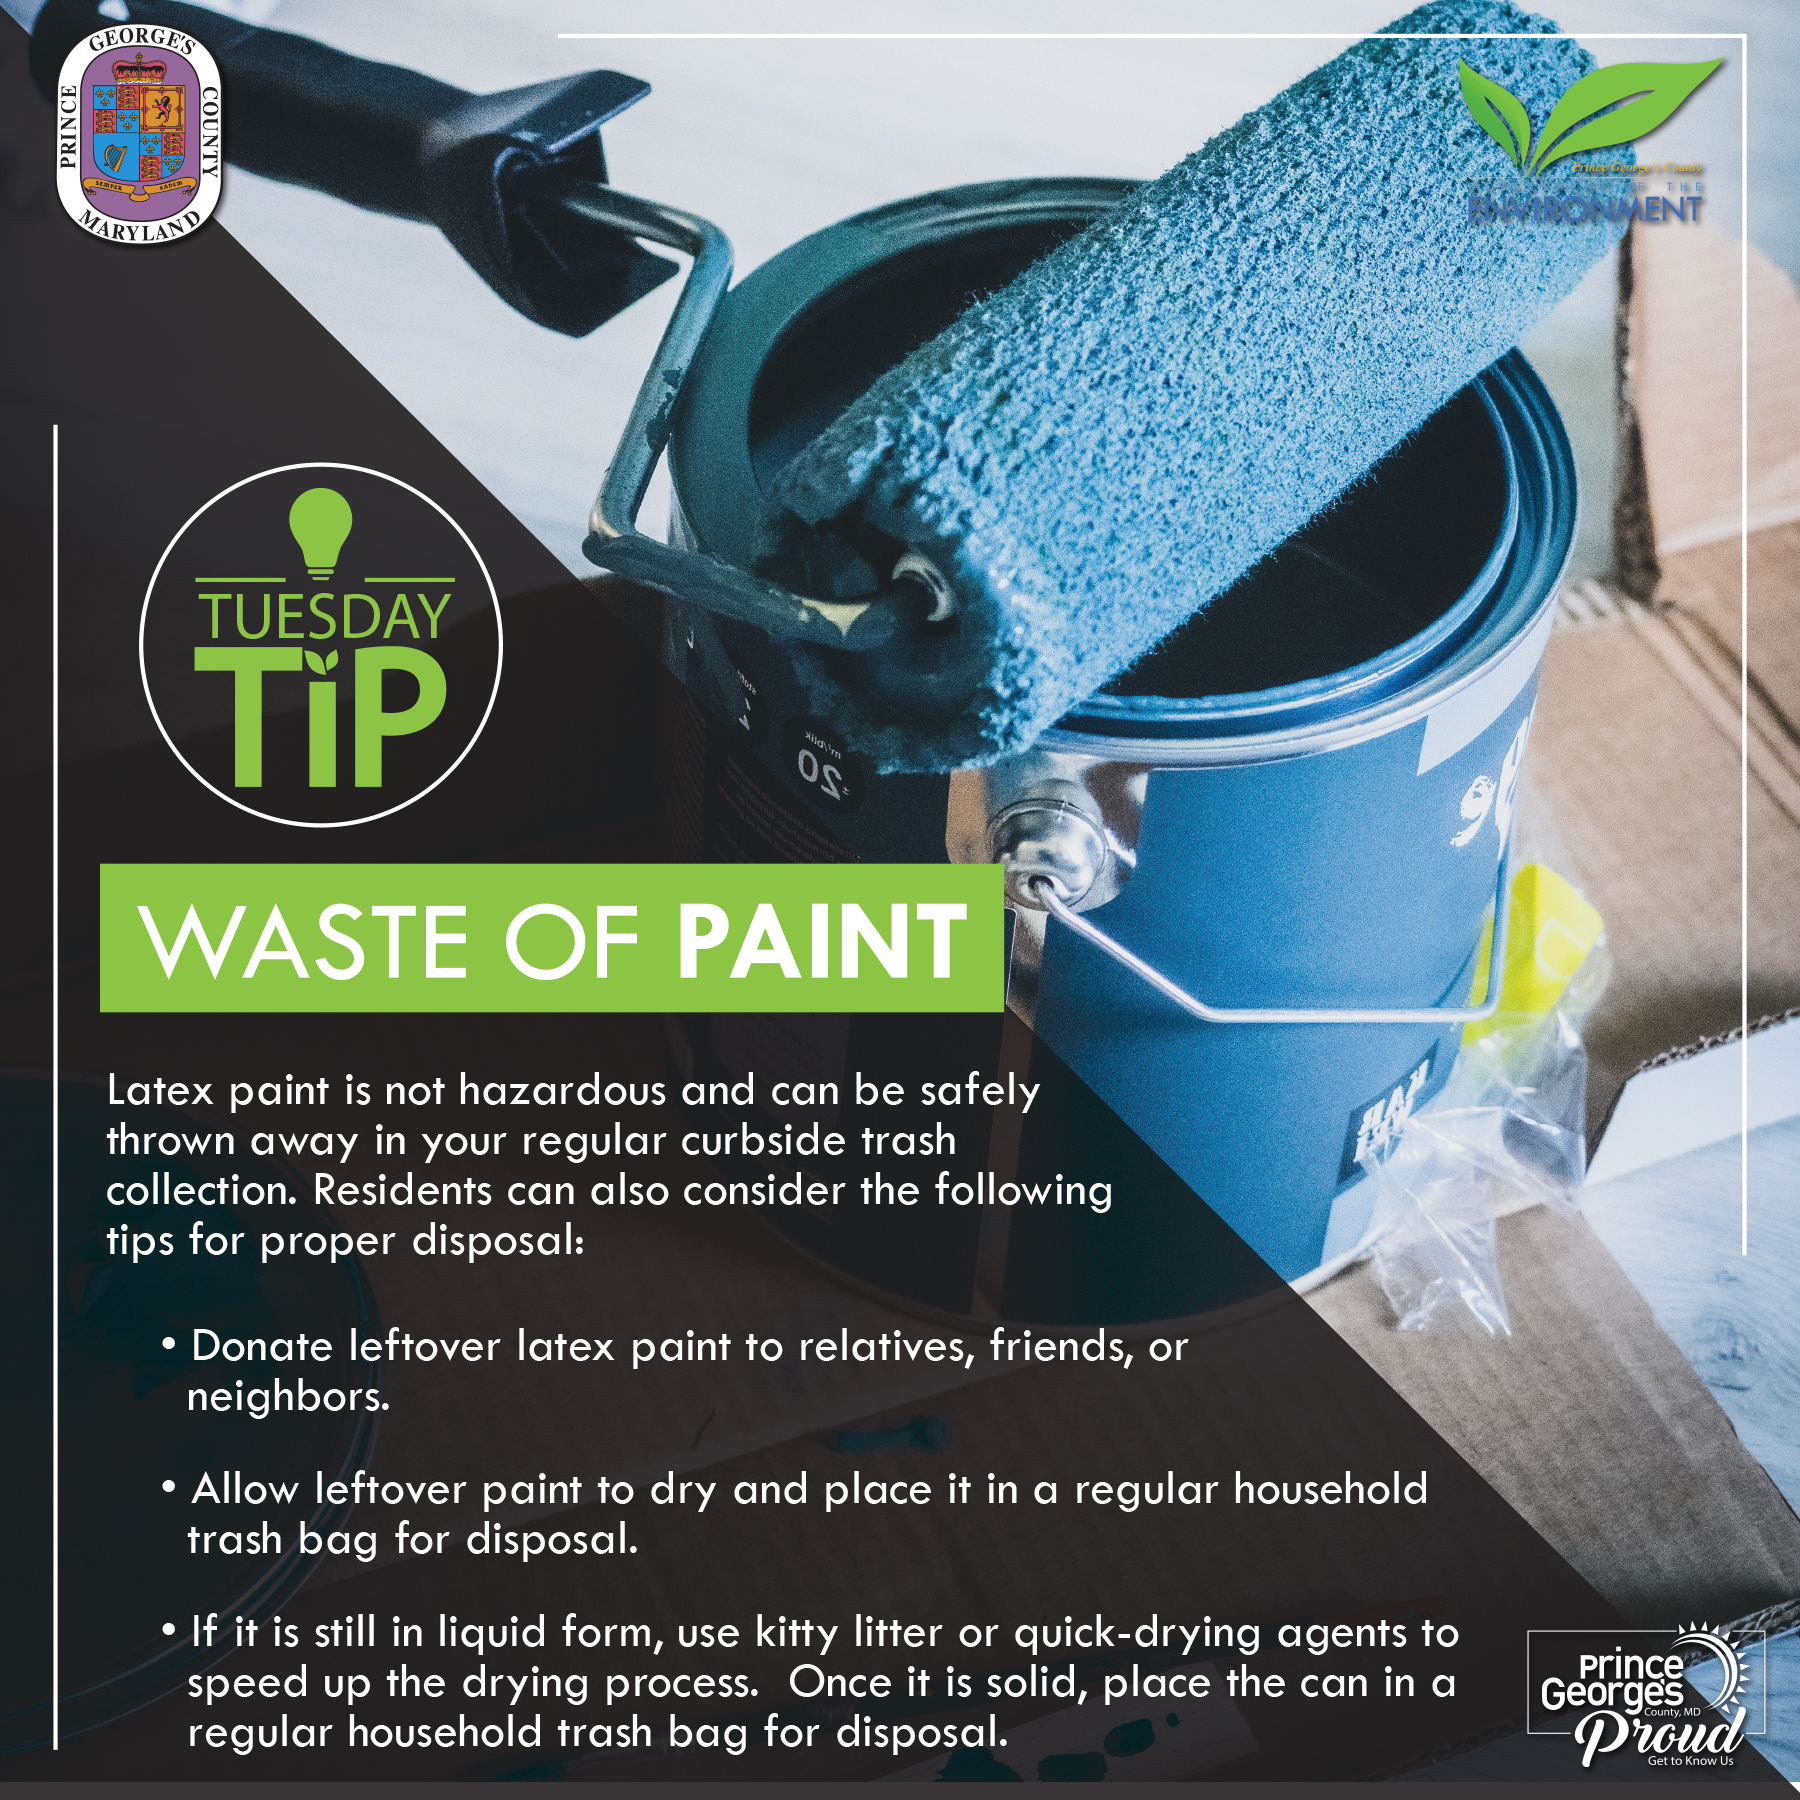 Tues tip 6.16.20 waste of paint eng